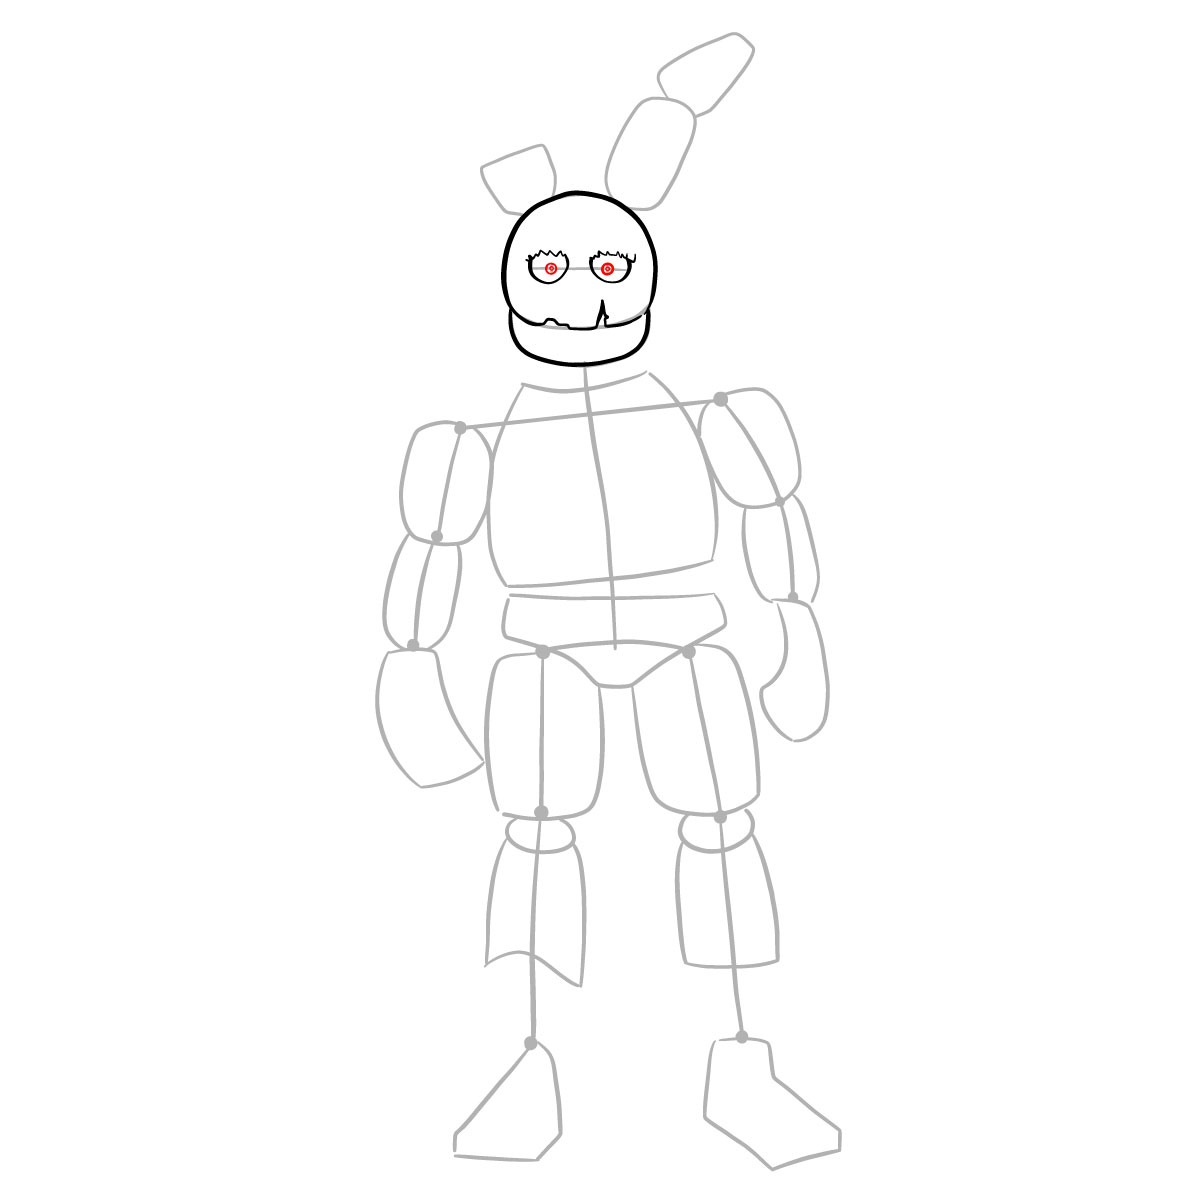 How to draw Springtrap from FNAF 3 - step 07